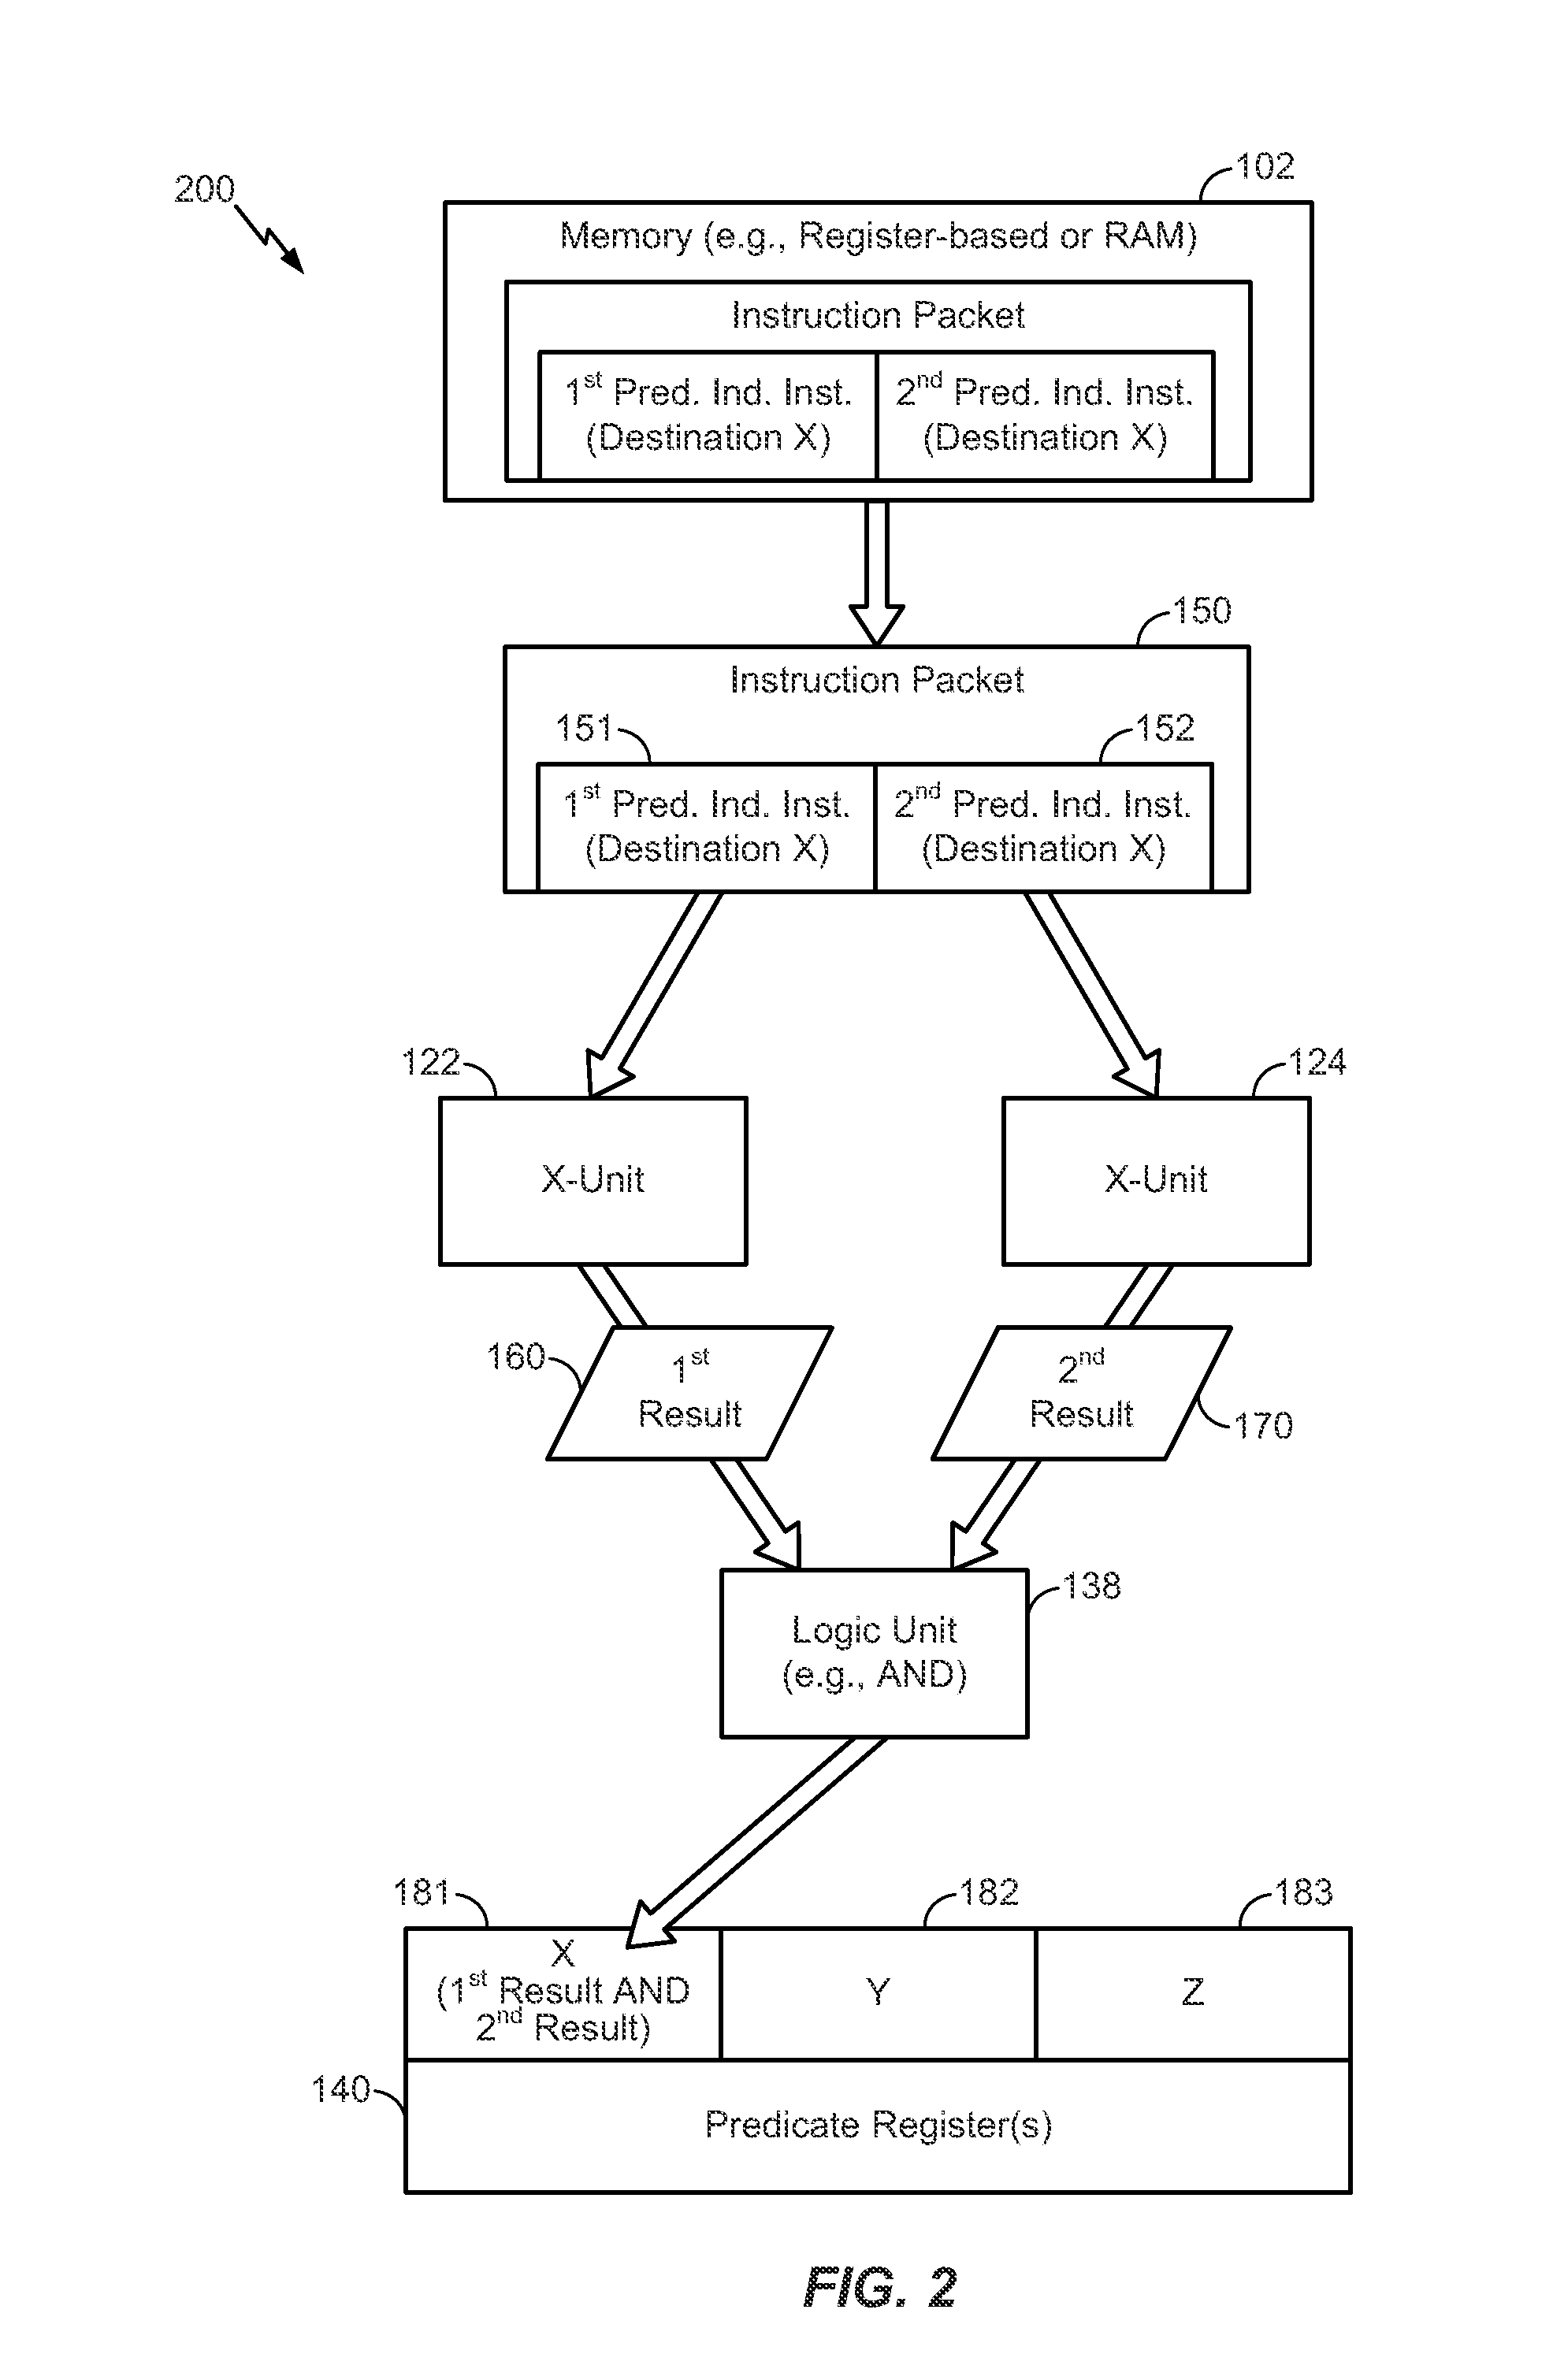 Instruction packet including multiple instructions having a common destination